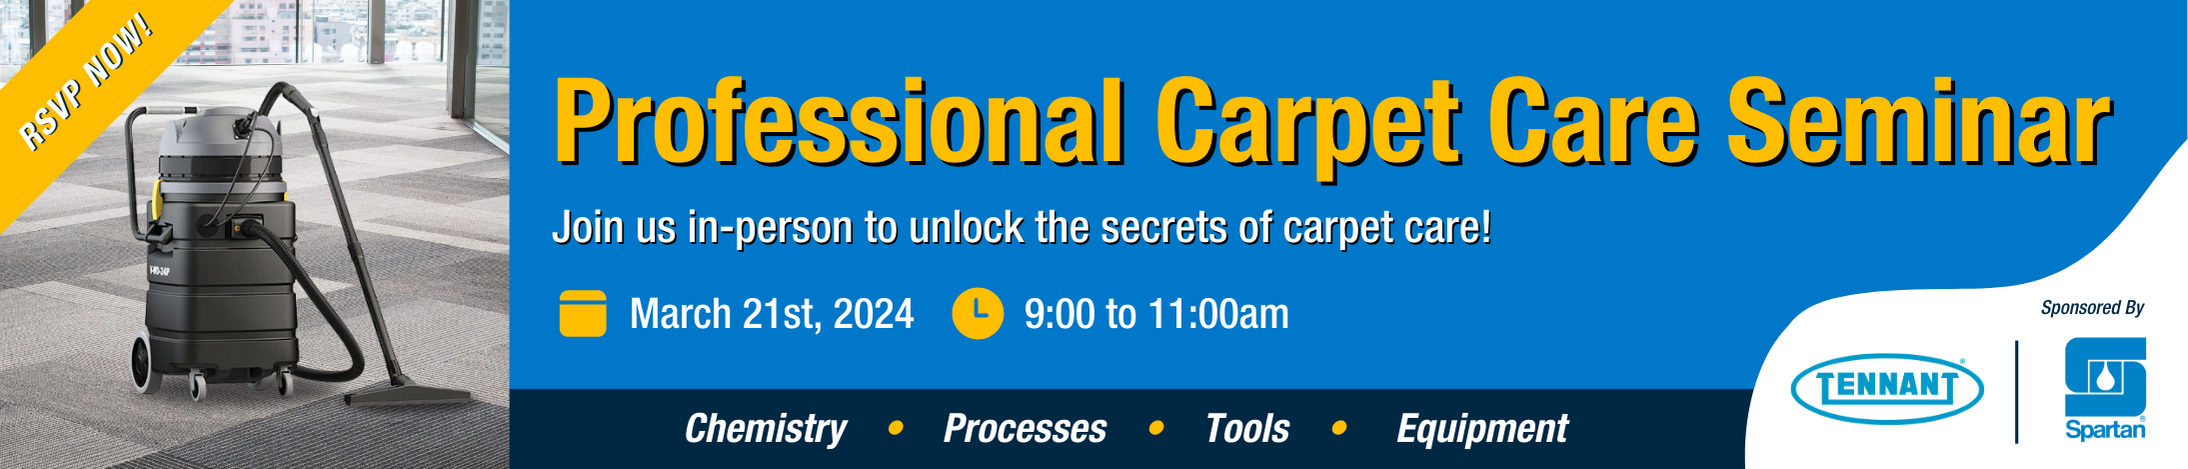 Professional Carpet Care Seminar header image featuring vibrant visuals of cleaning equipment and a bustling seminar hall. Text overlay reads: 'Professional Carpet Care Seminar, join us in-person to unlock the secrets of carpet care, March 21st, 9-11a, chemistry, processes, tools, equipment, sponsored by Tennant & Spartan, RSVP now.' Located in the Minneapolis area.